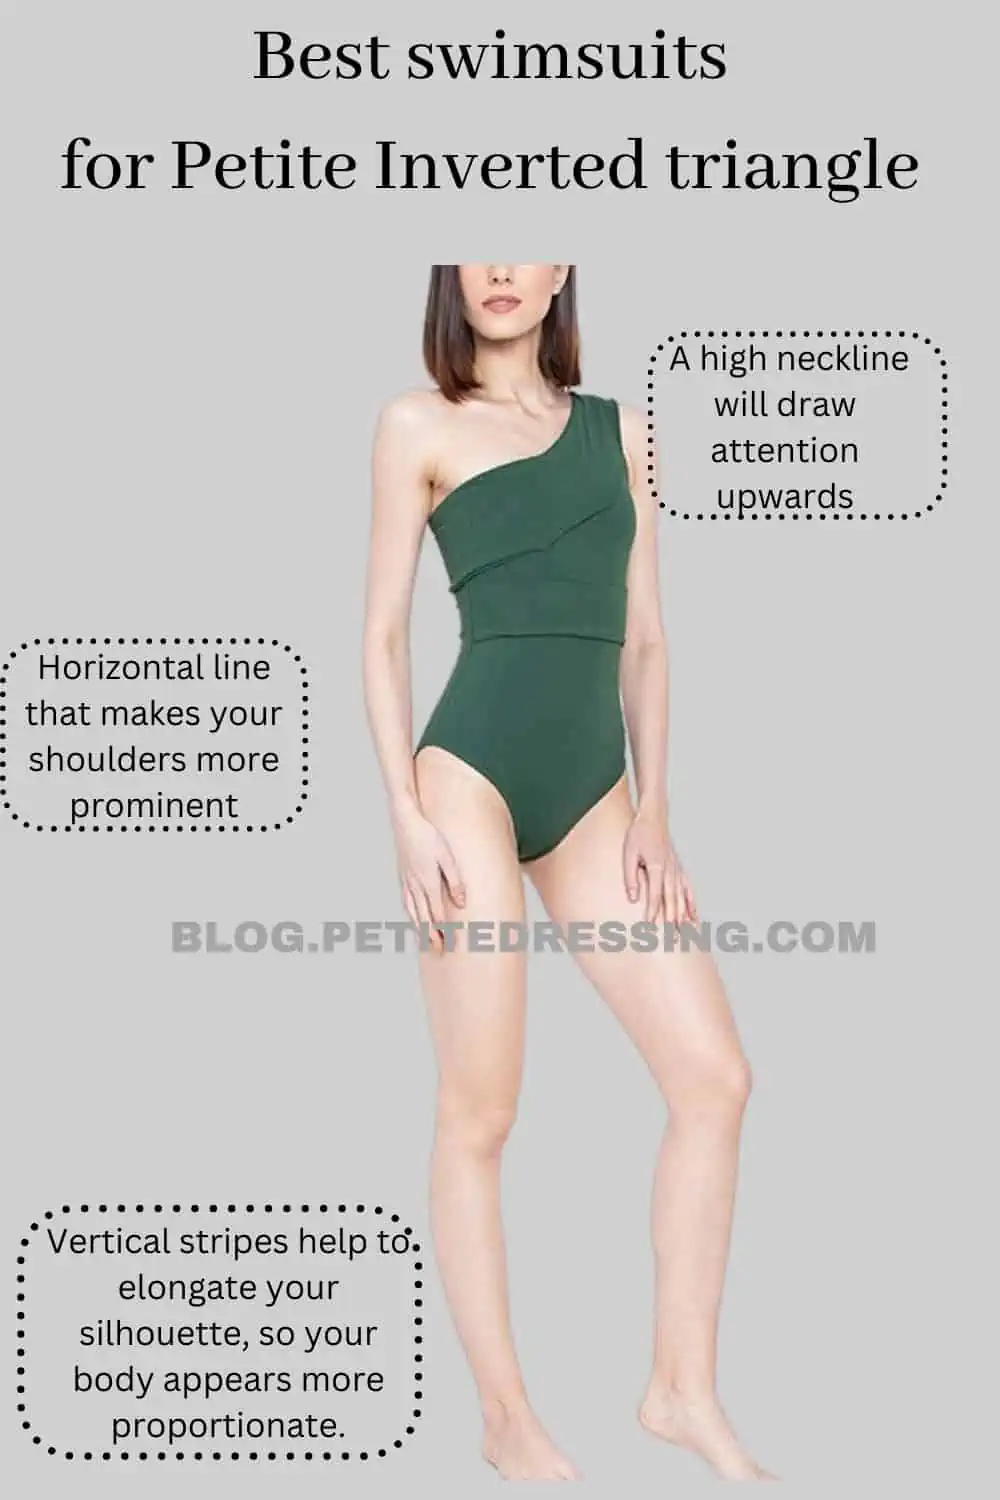 The Swimsuit Guide For Petite Inverted Triangle Shape - Petite